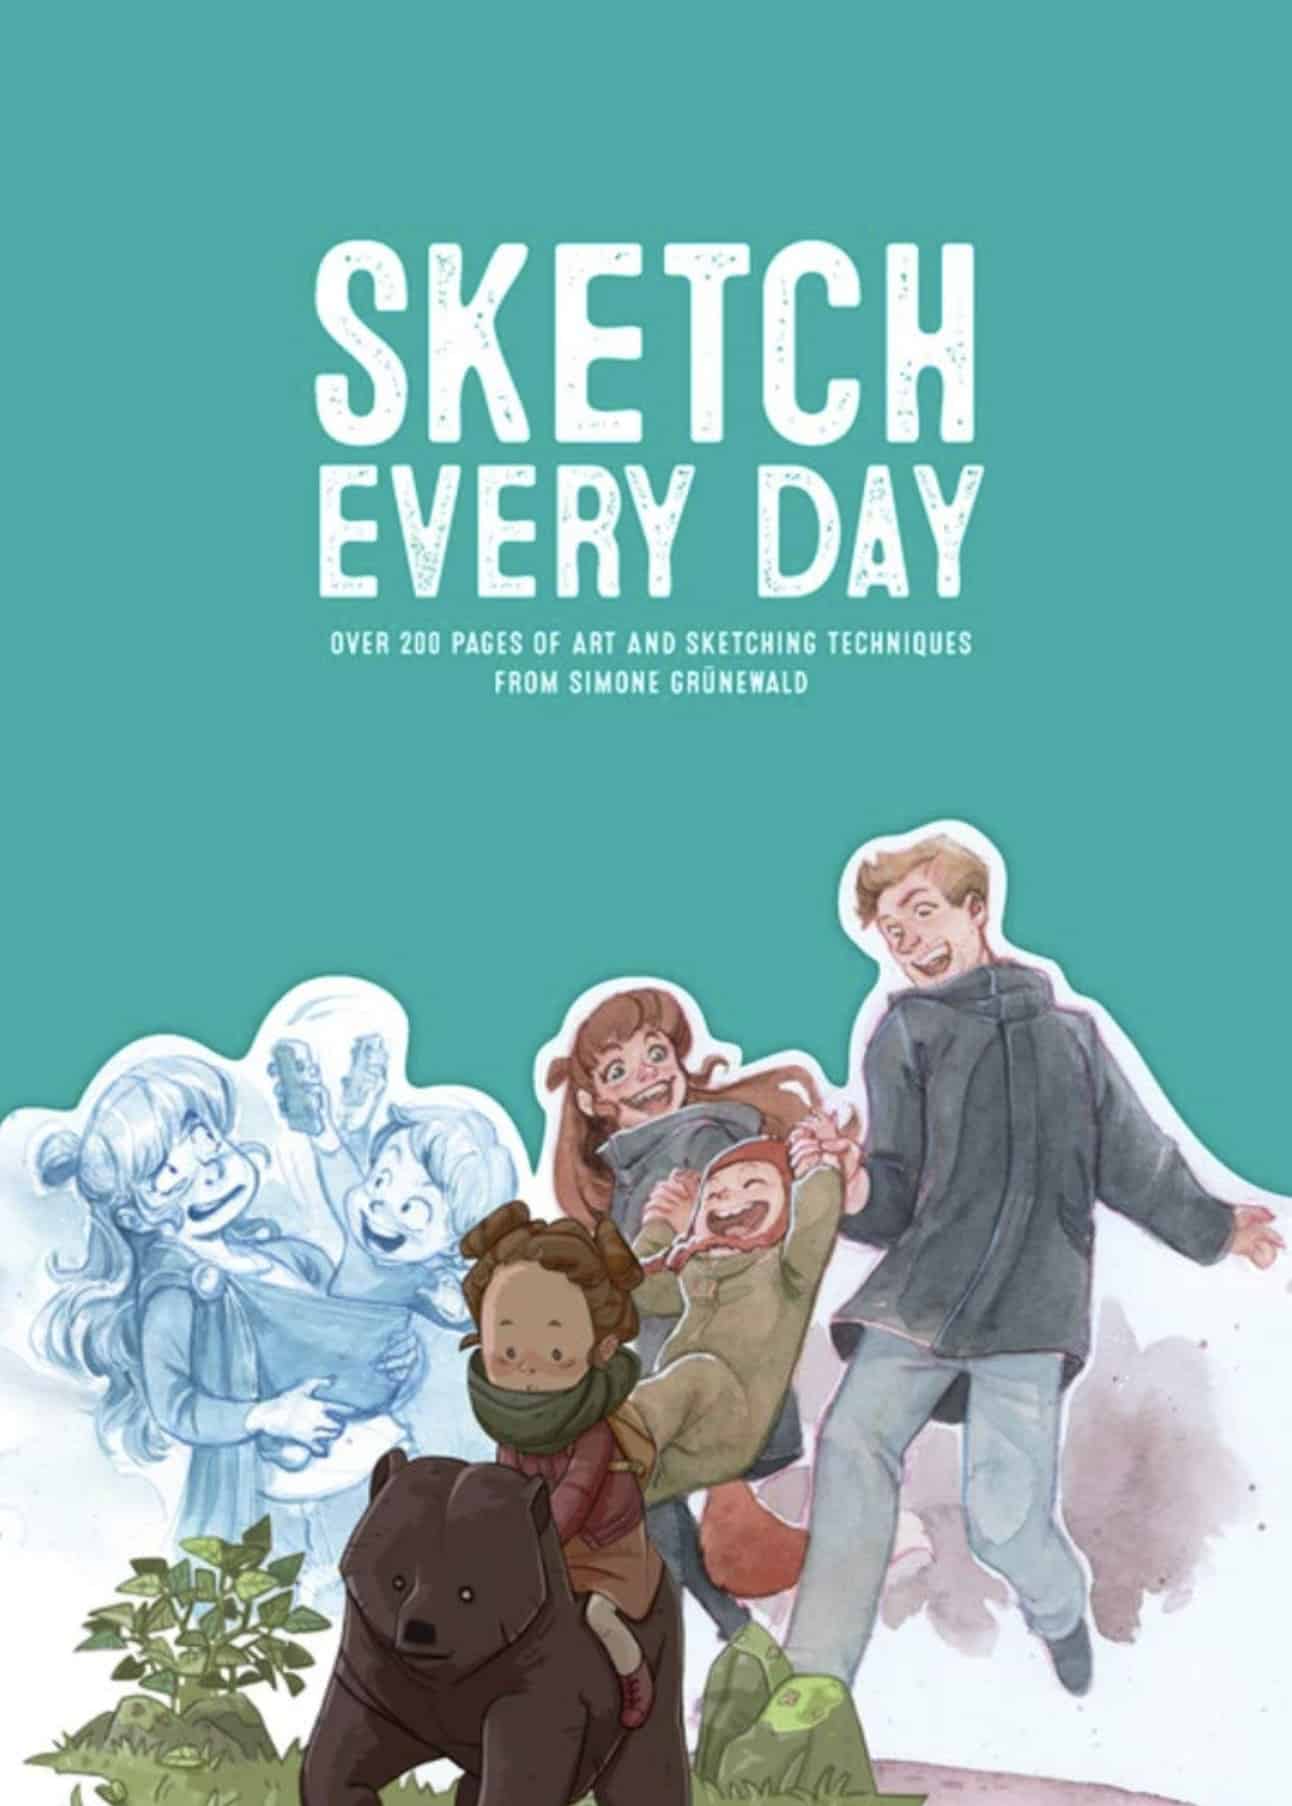 A book to help you draw every day so you can get better at drawing. 